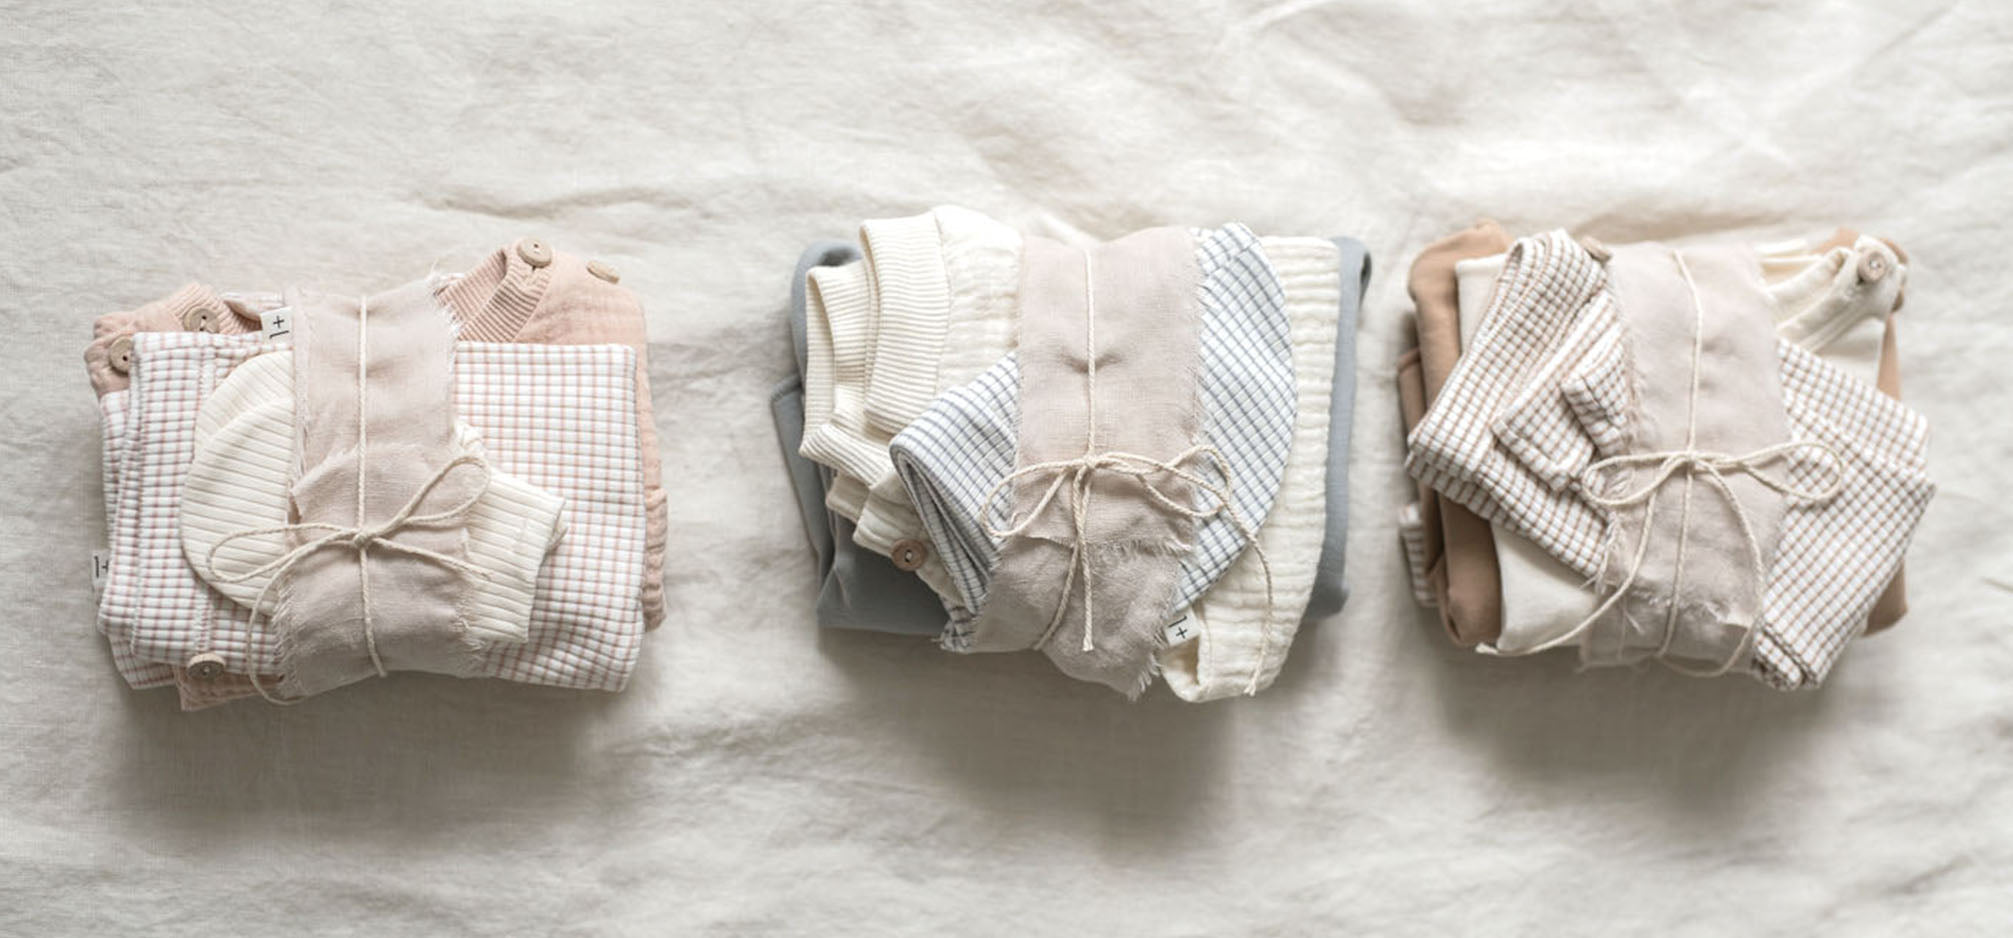 3 bundles of baby clothing tied with string. Natural backdrop